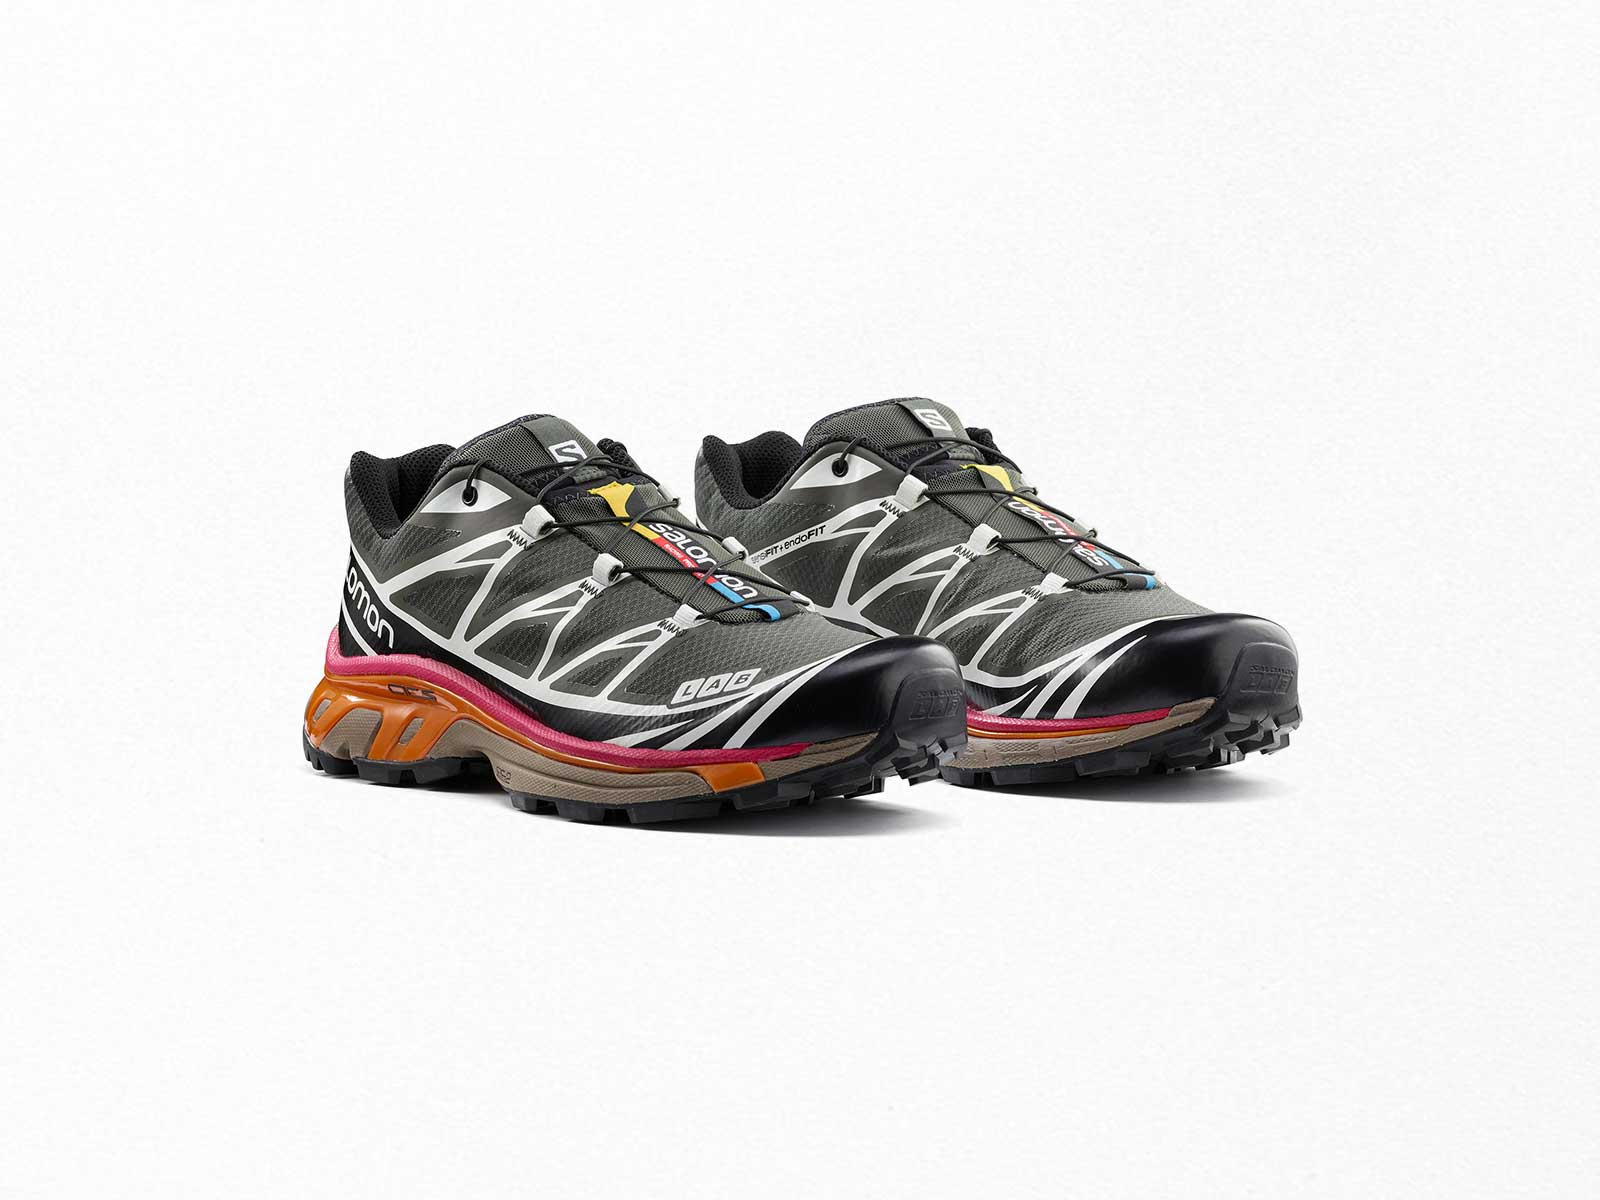 Salomon brings back its favourite colours for the 10th anniversary of its XT-6 RECUT silhouette